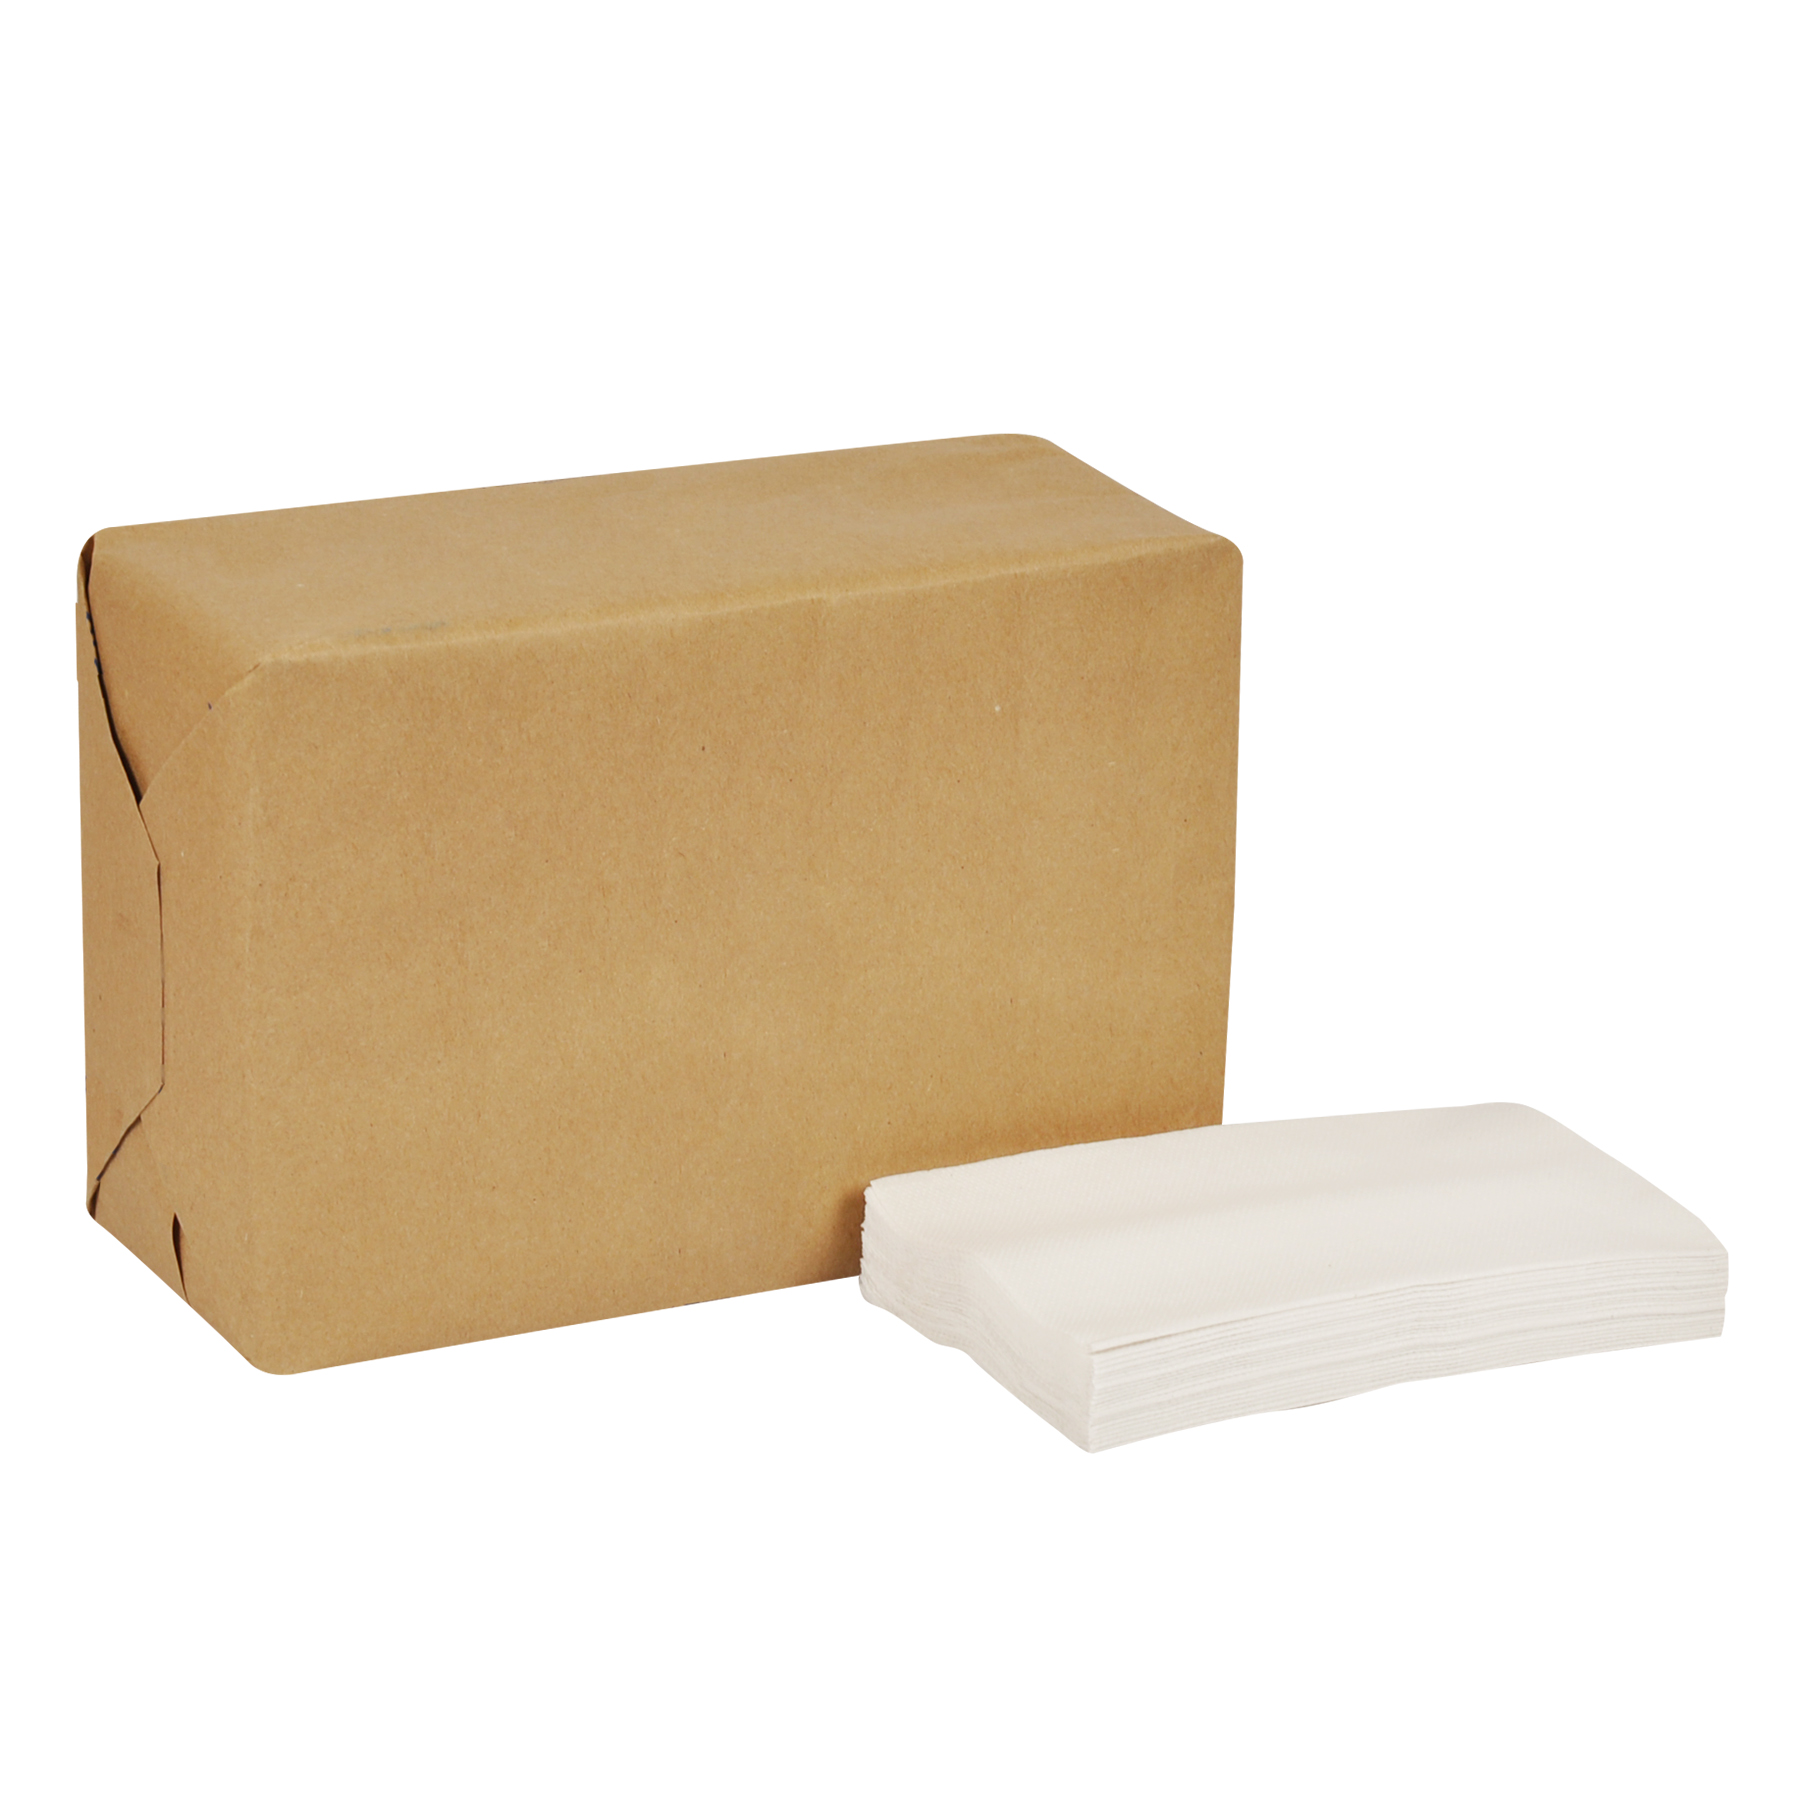 Basic paper wipers next to package